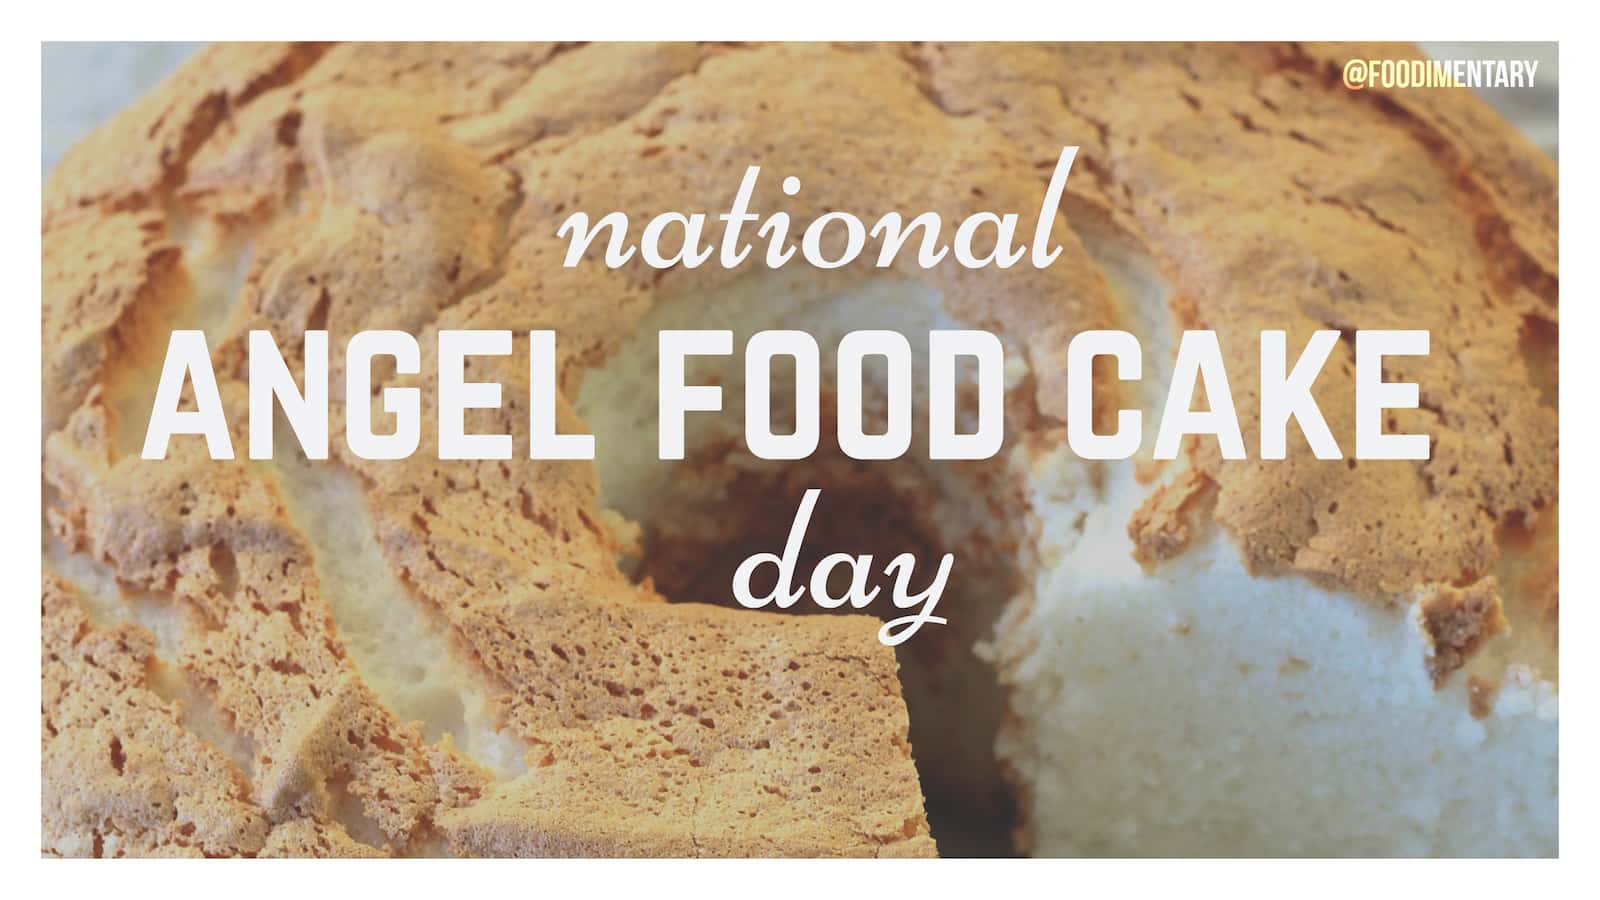 National Angel Food Cake Day Quotes, Wishes And Messages